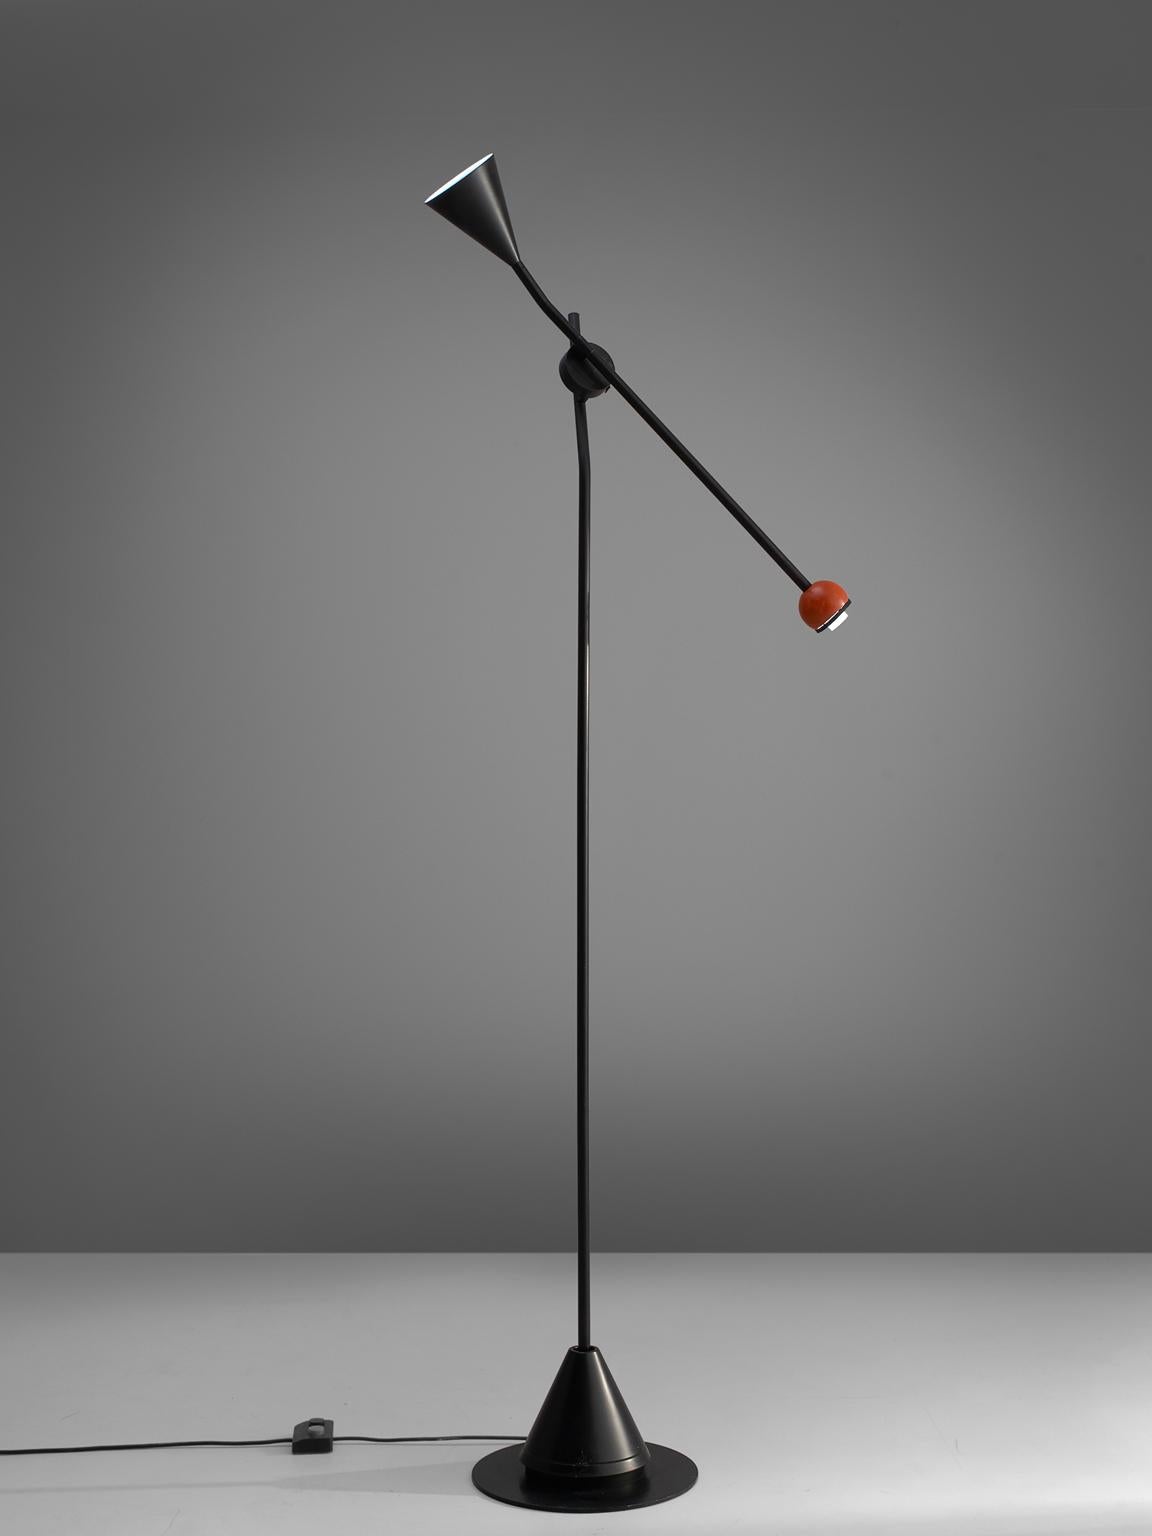 Ernesto Gismondi for Artemide, floor lamp, metal, Italy, 1985

This floor lamp is architectural and beautiful in its simplicity. The piece has an adjustable arm that can be put in any position. The piece has two colors, black and red and through